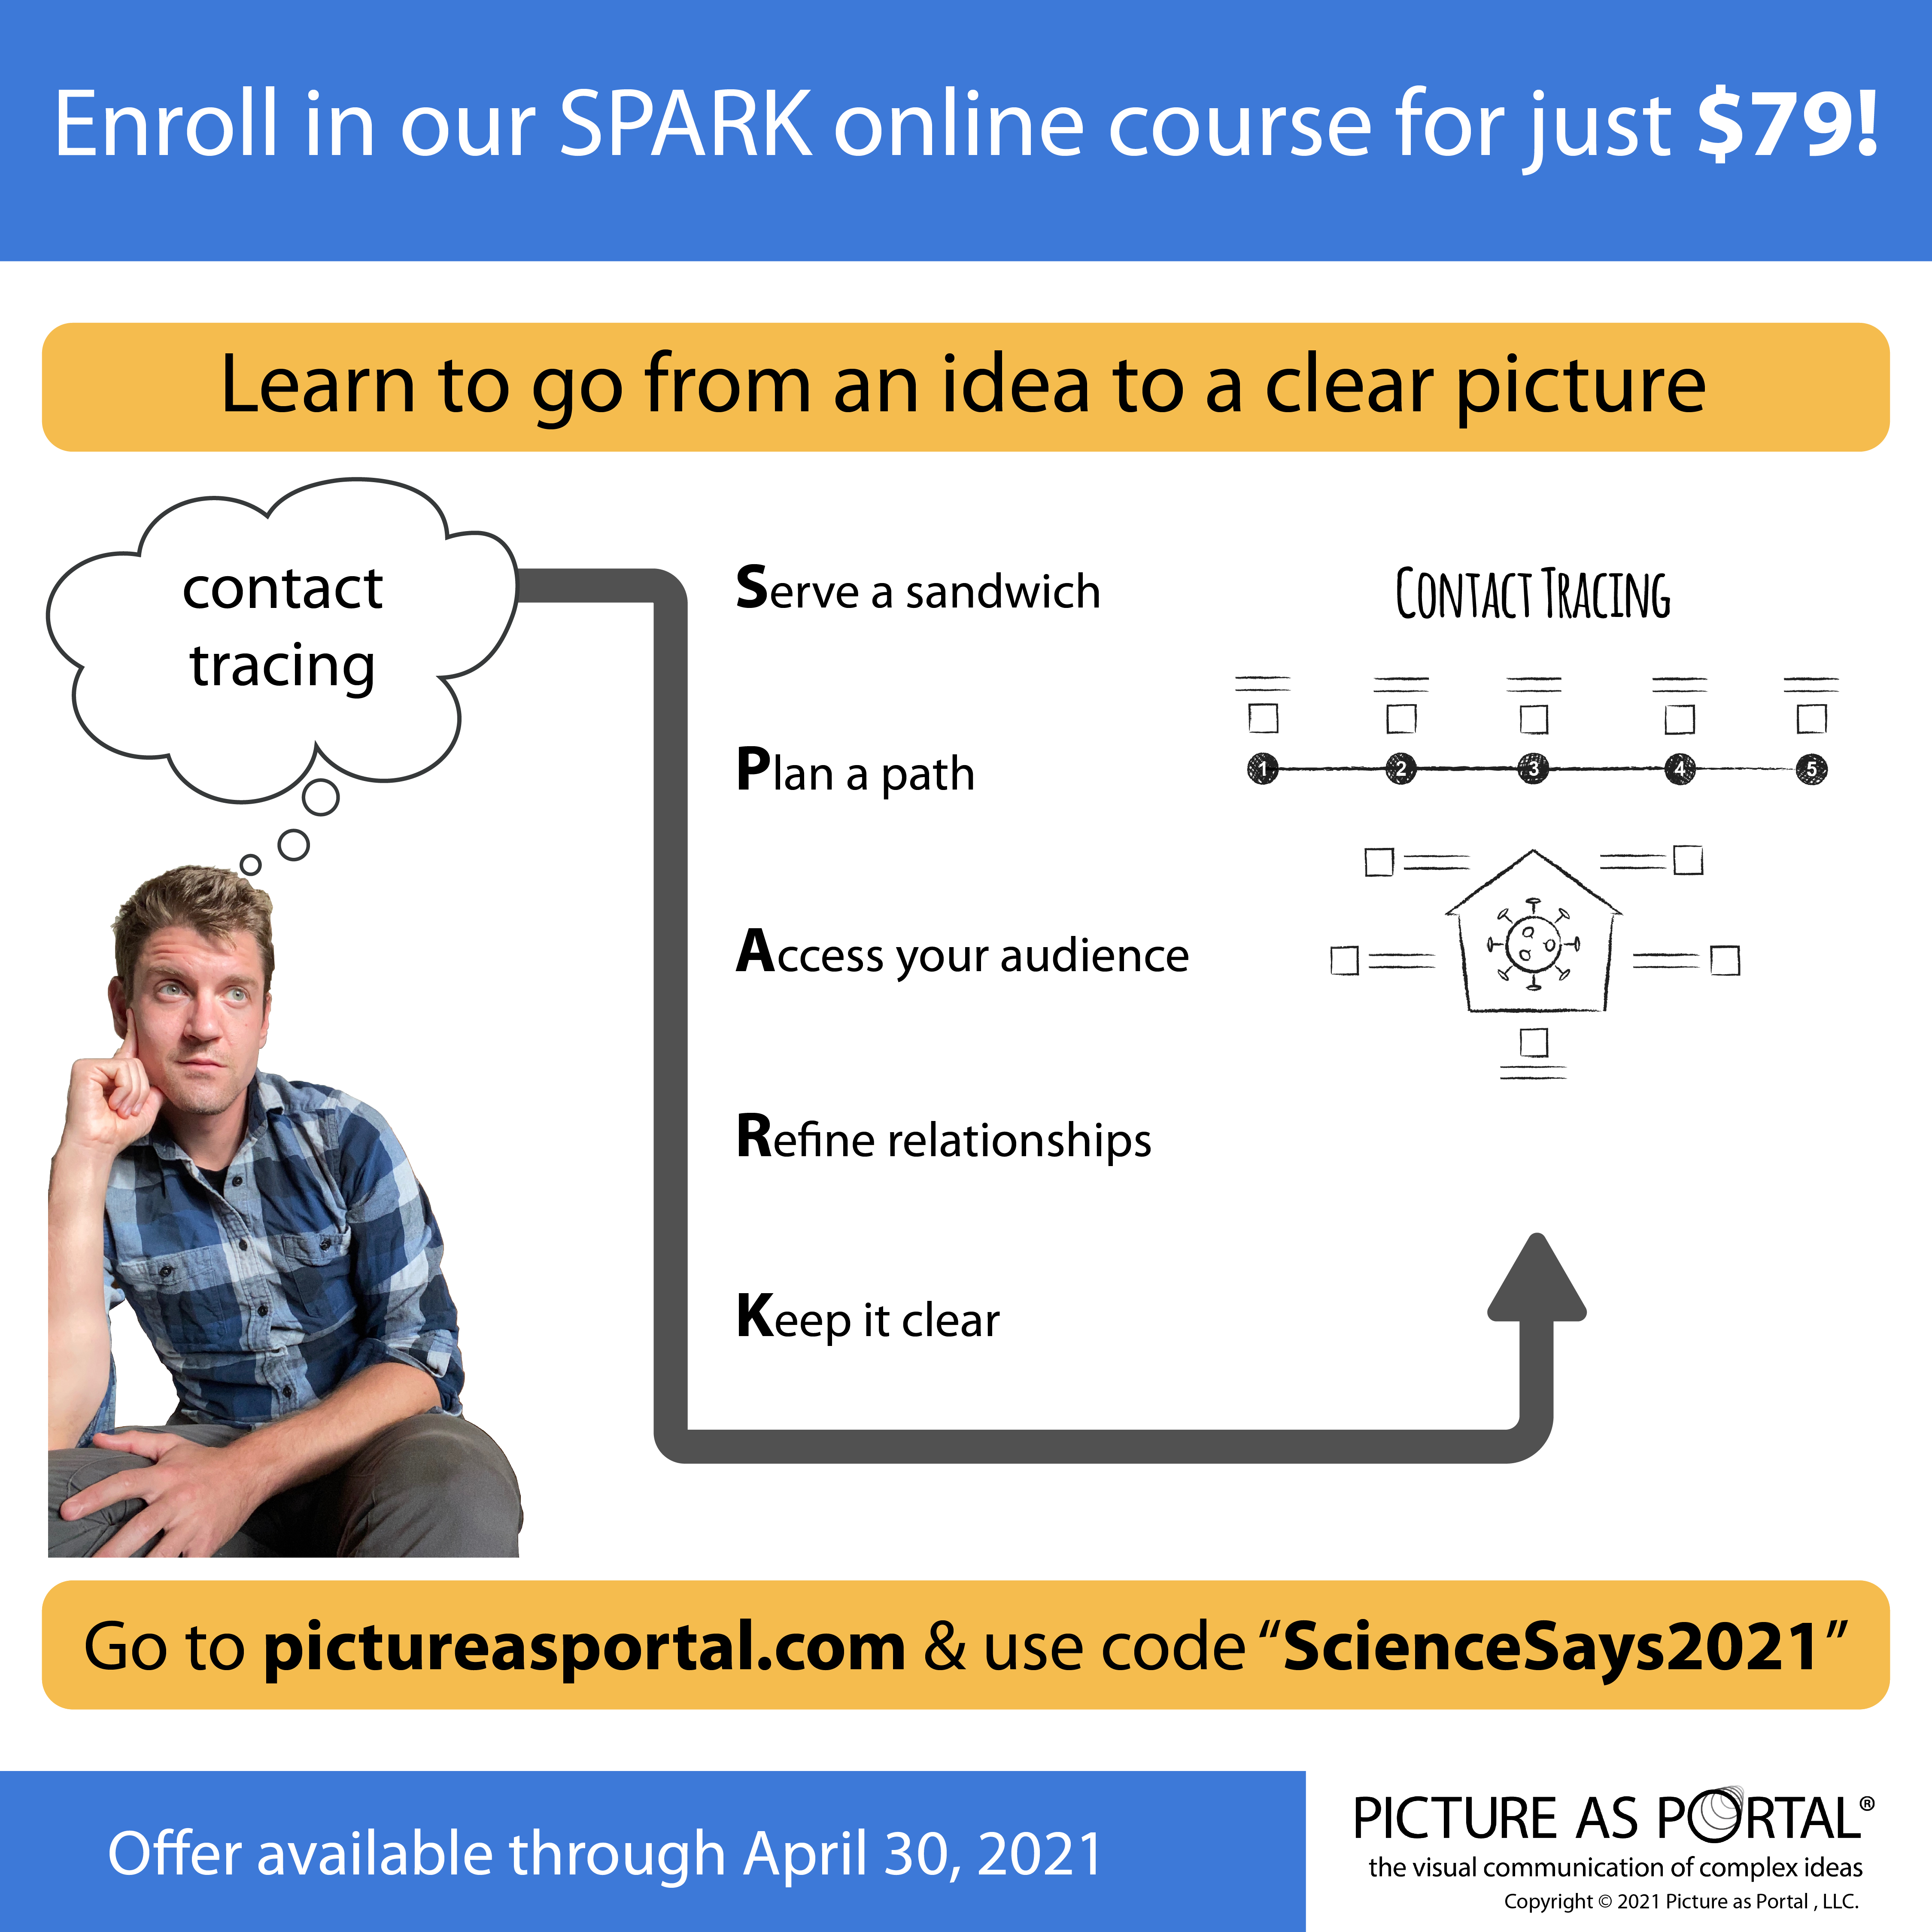 Advertisement for a discount code to the SPARK course from Picture as Portal. The code is "ScienceSays2021"